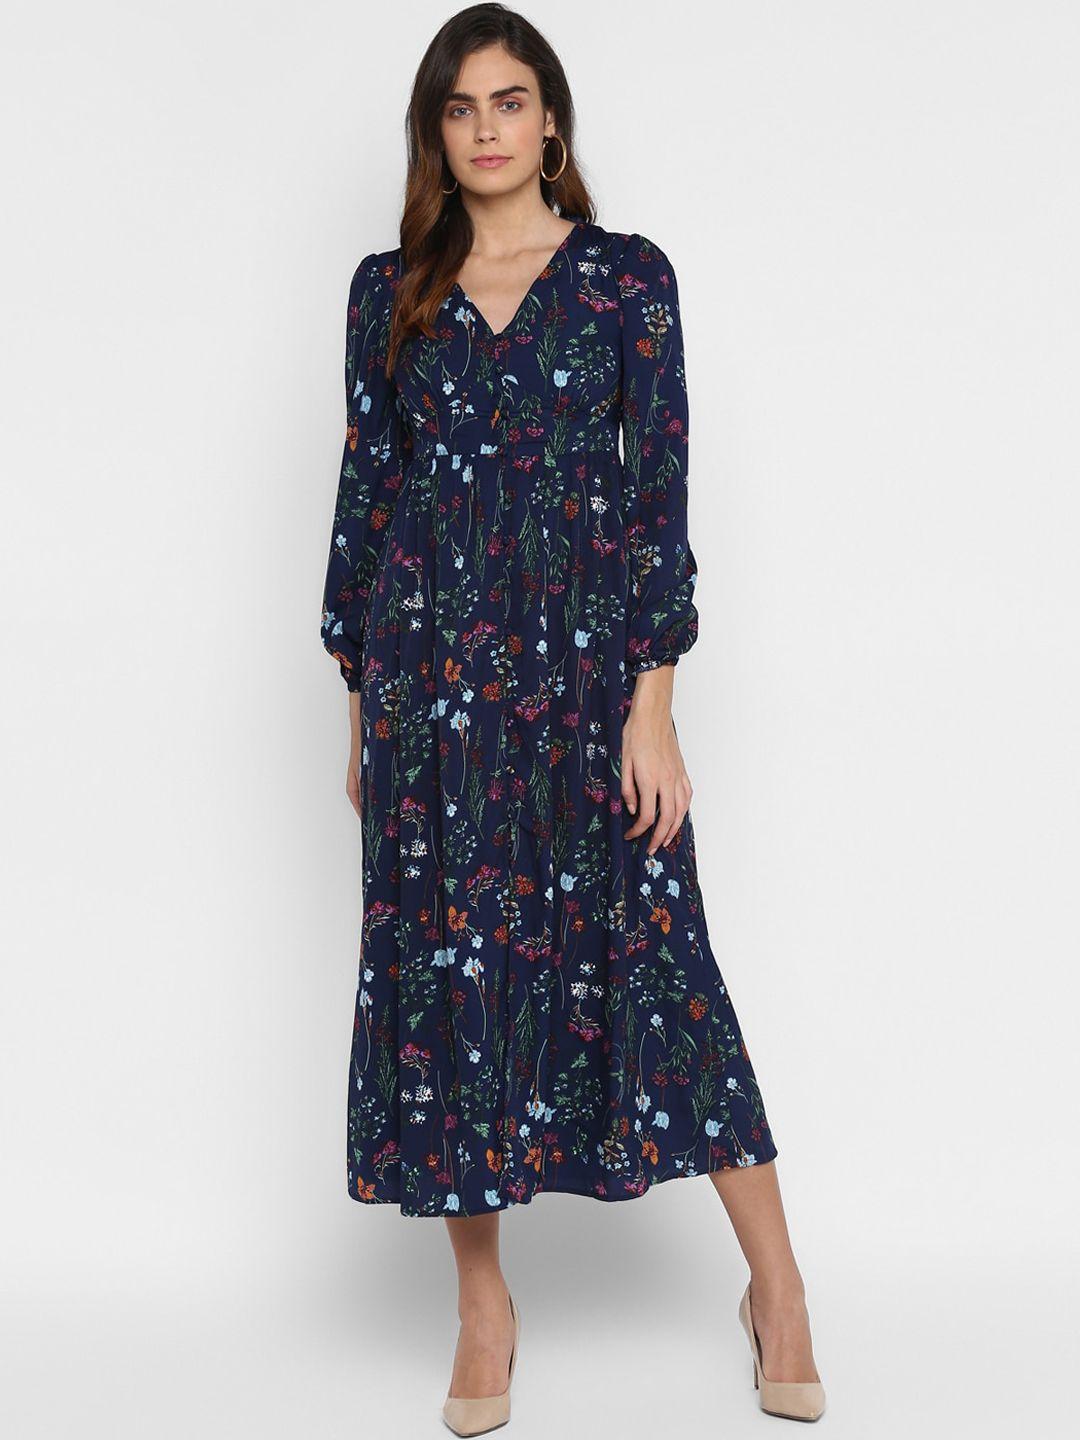 house of kkarma women blue printed fit and flare dress